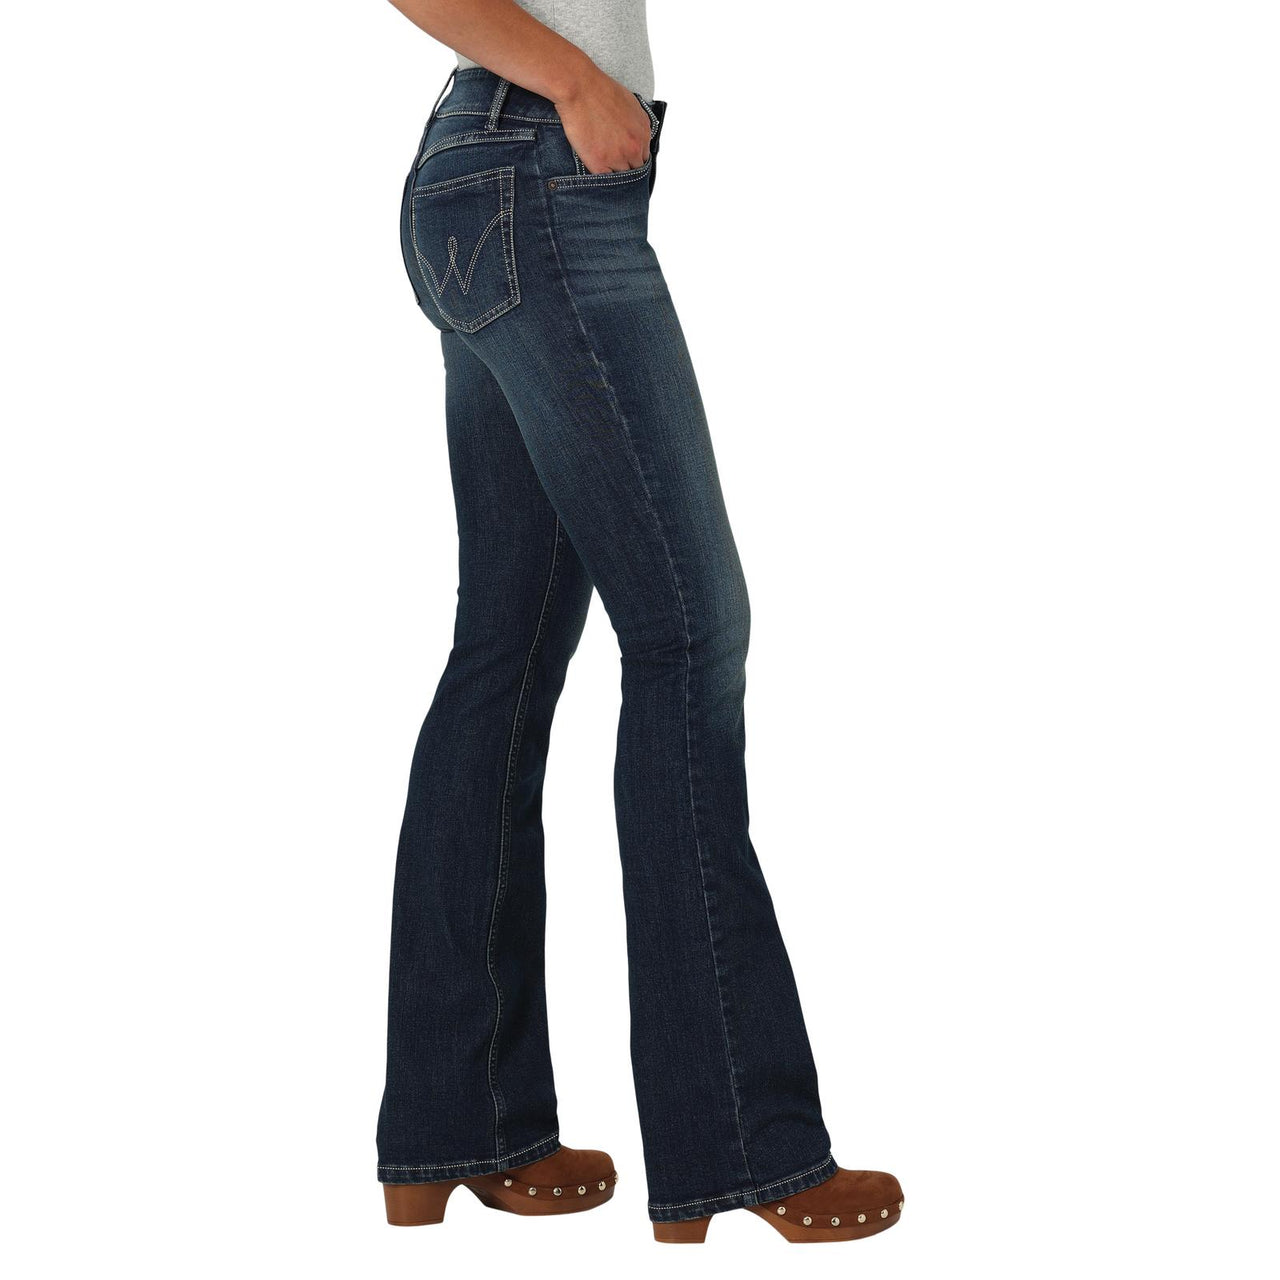 Wrangler Women's Essential Boot Cut Jeans - Taylor